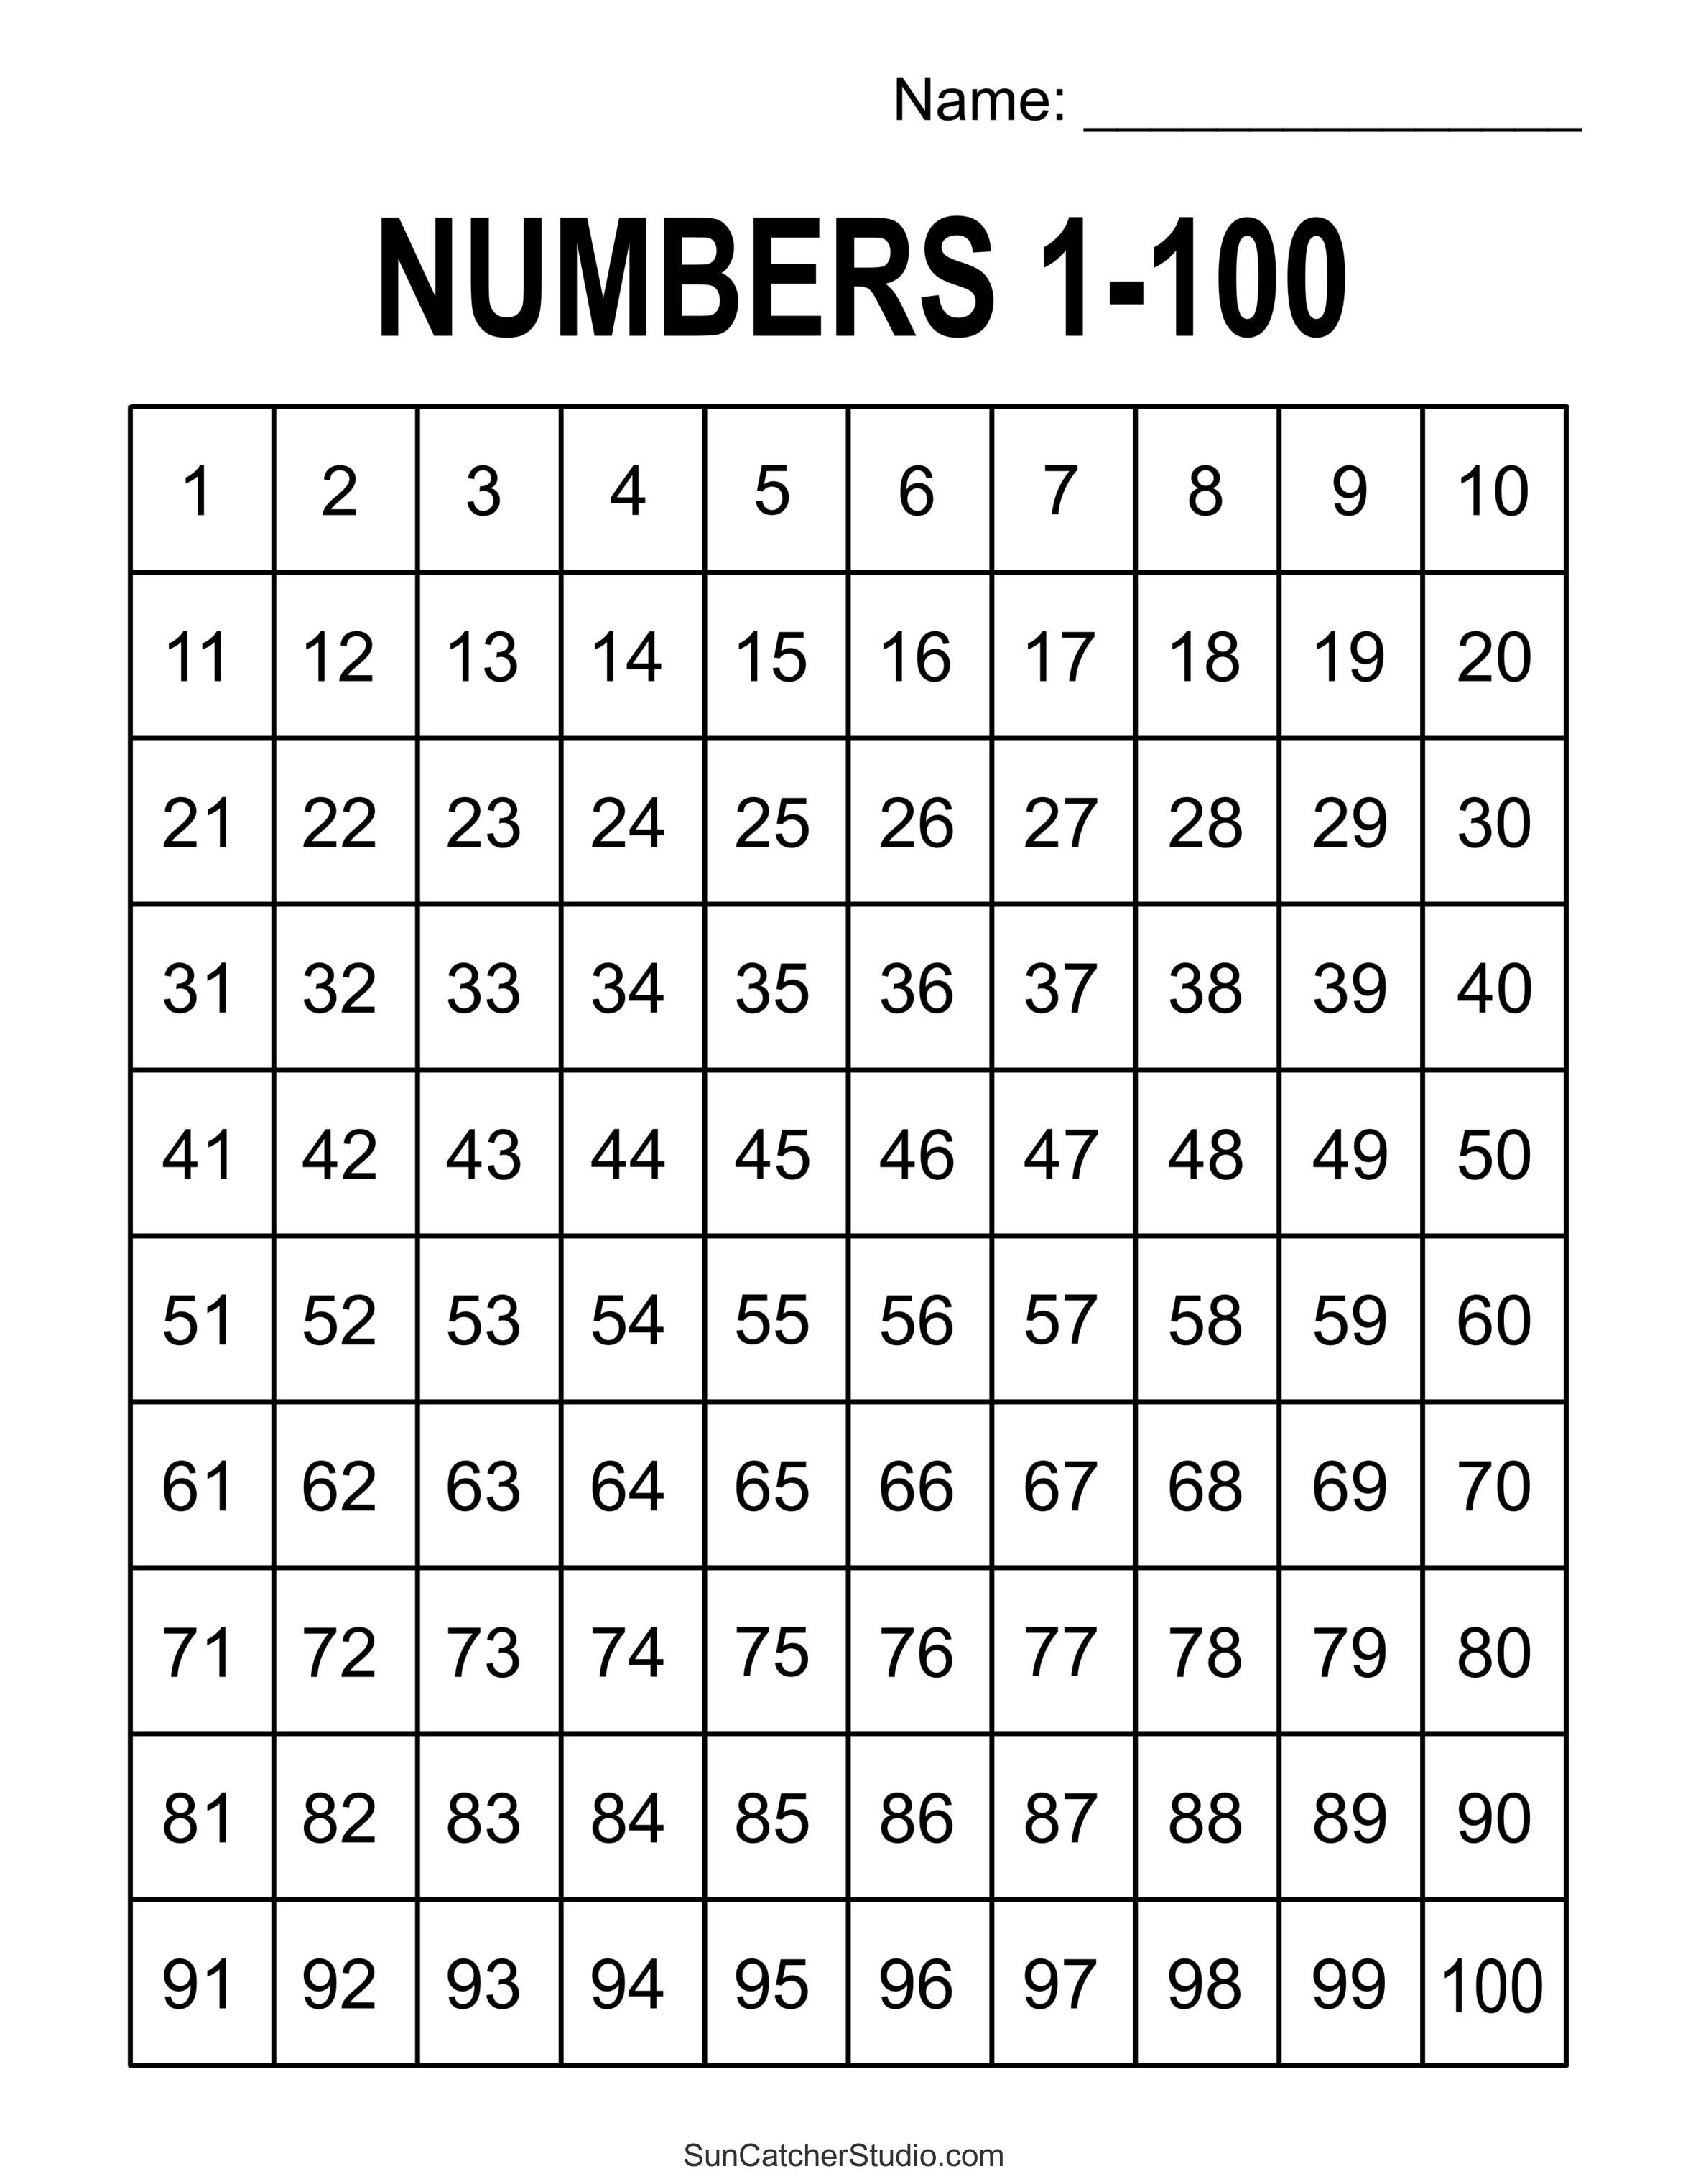 free-printable-hundreds-charts-numbers-1-to-100-diy-projects